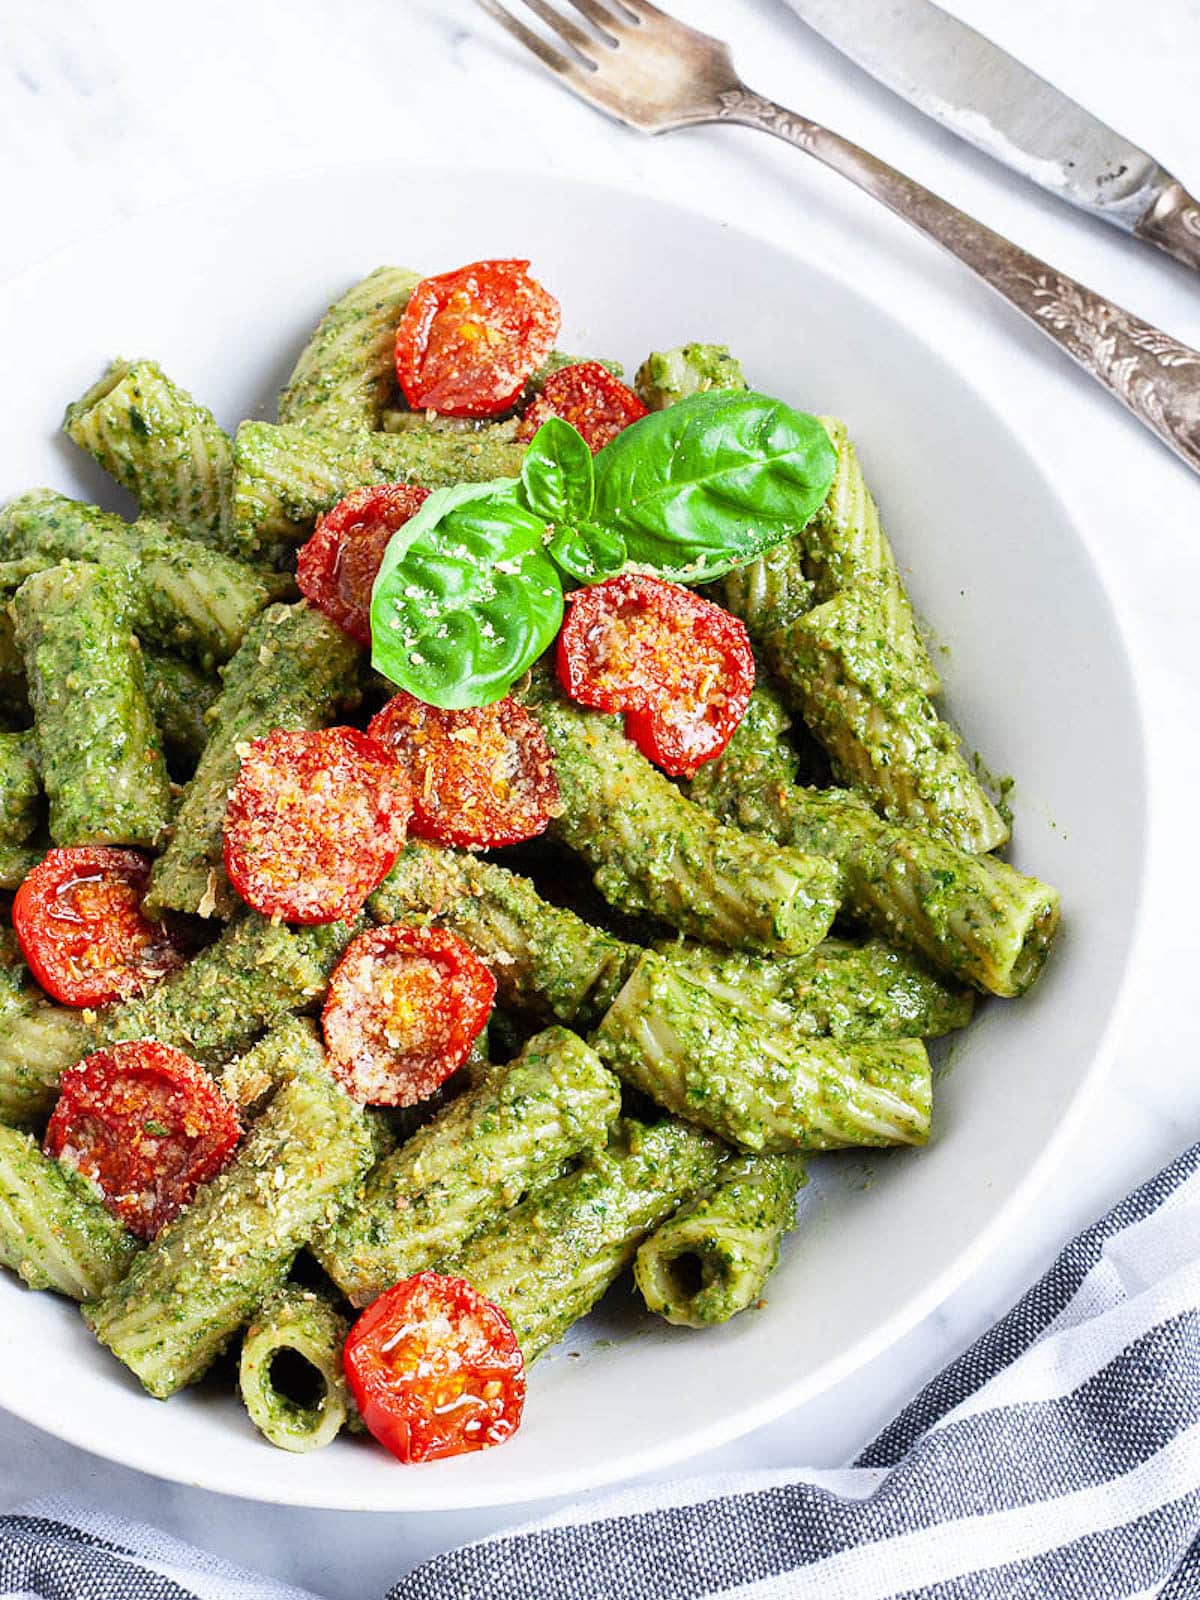 bowl of pesto pasta with tomatoes and basil.